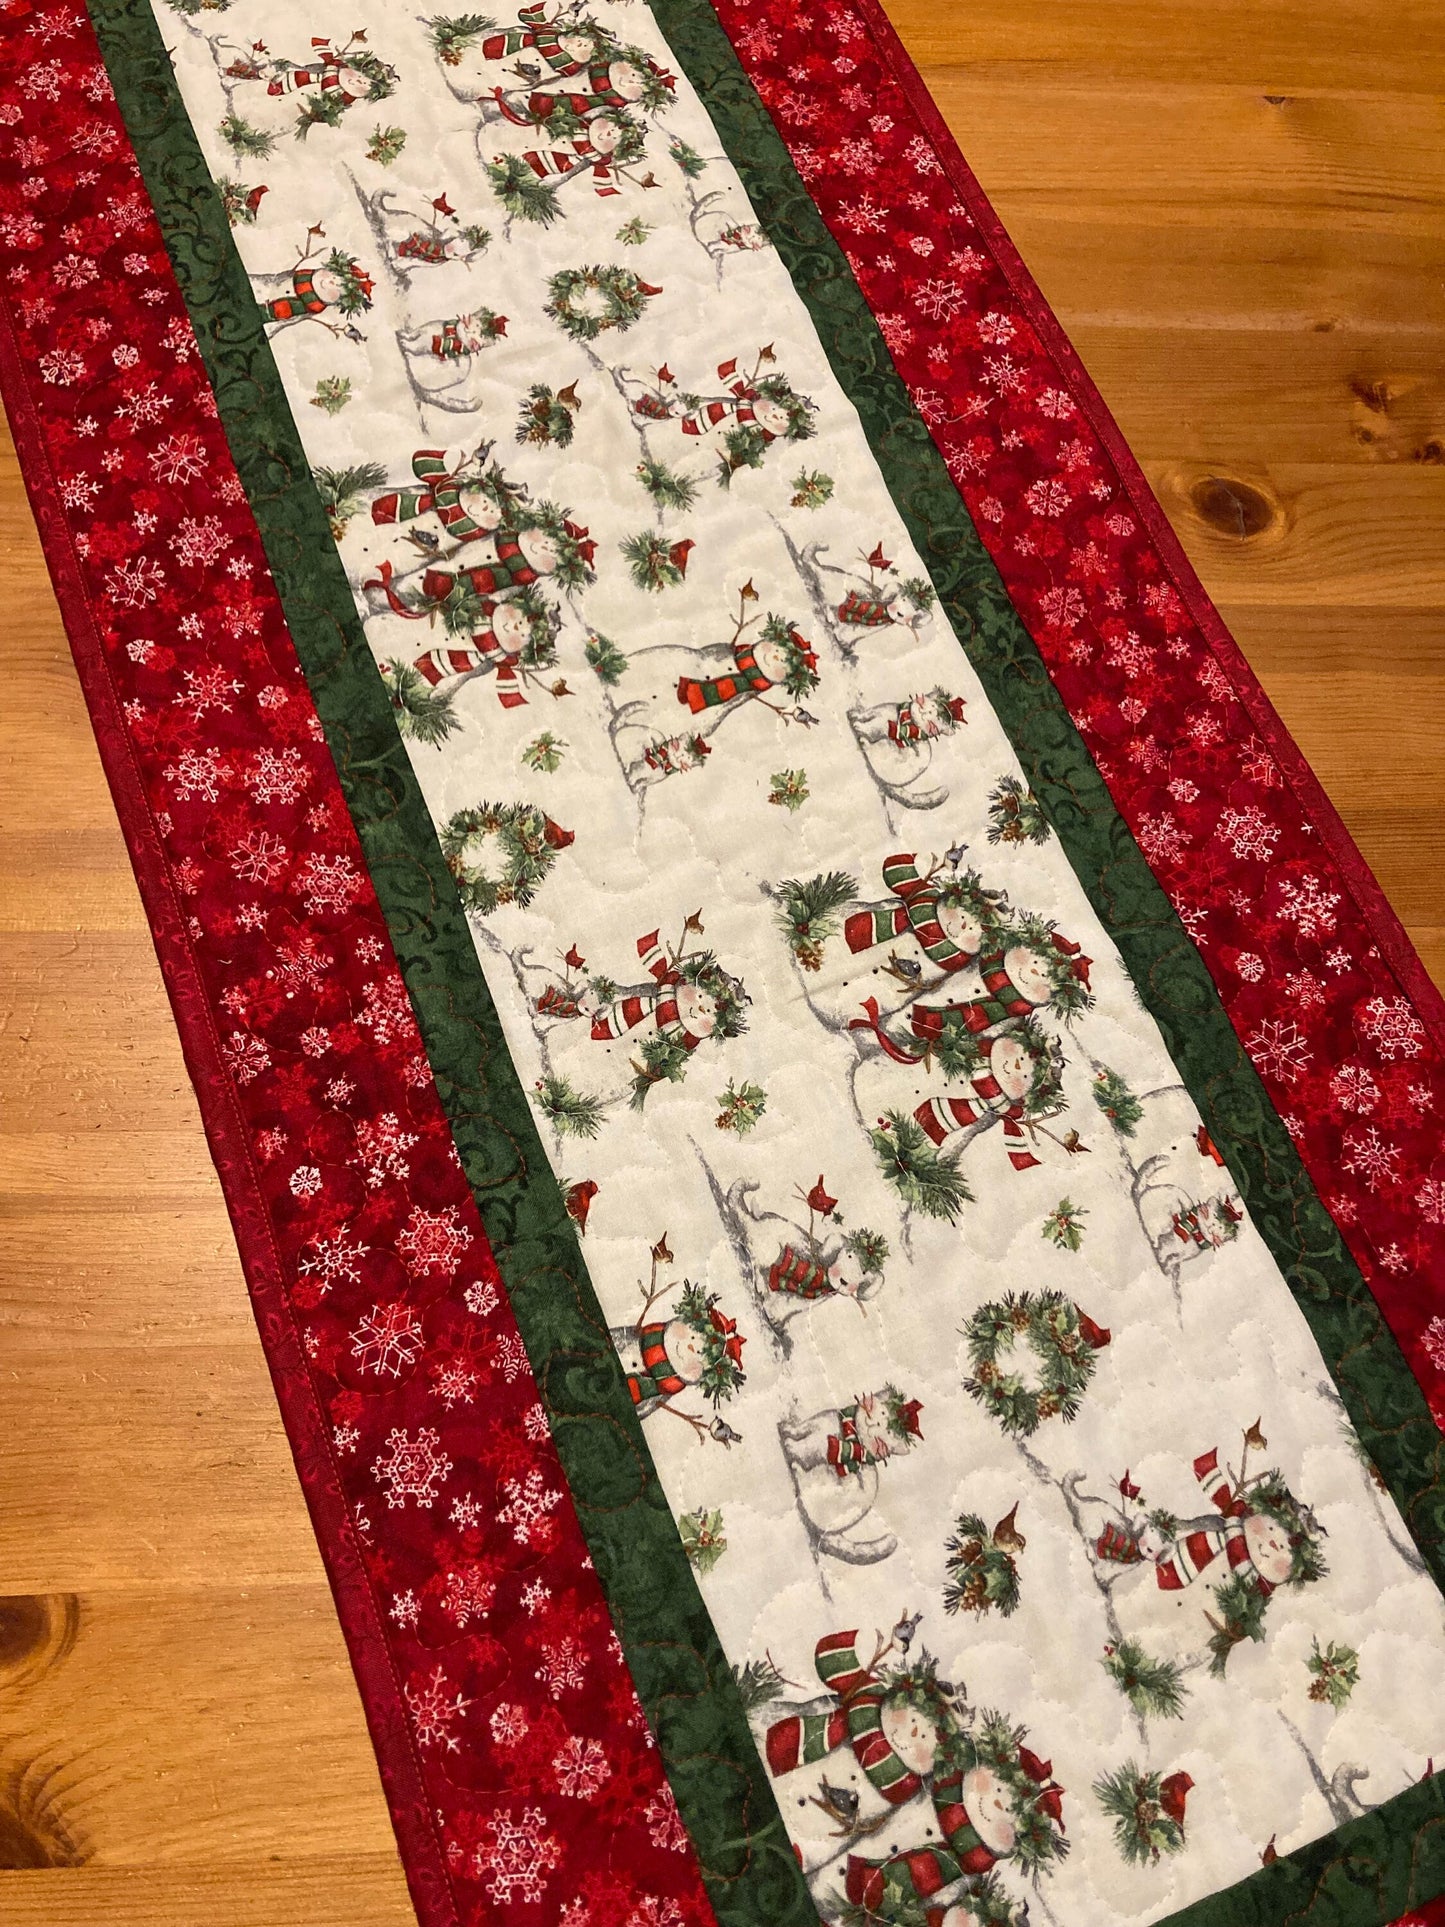 Snowman Christmas Winter Table Runner, 14x48" Quilted, Reversible, Snowflakes Birds Cats Scarves Children Whimsical, Dining Coffee Table